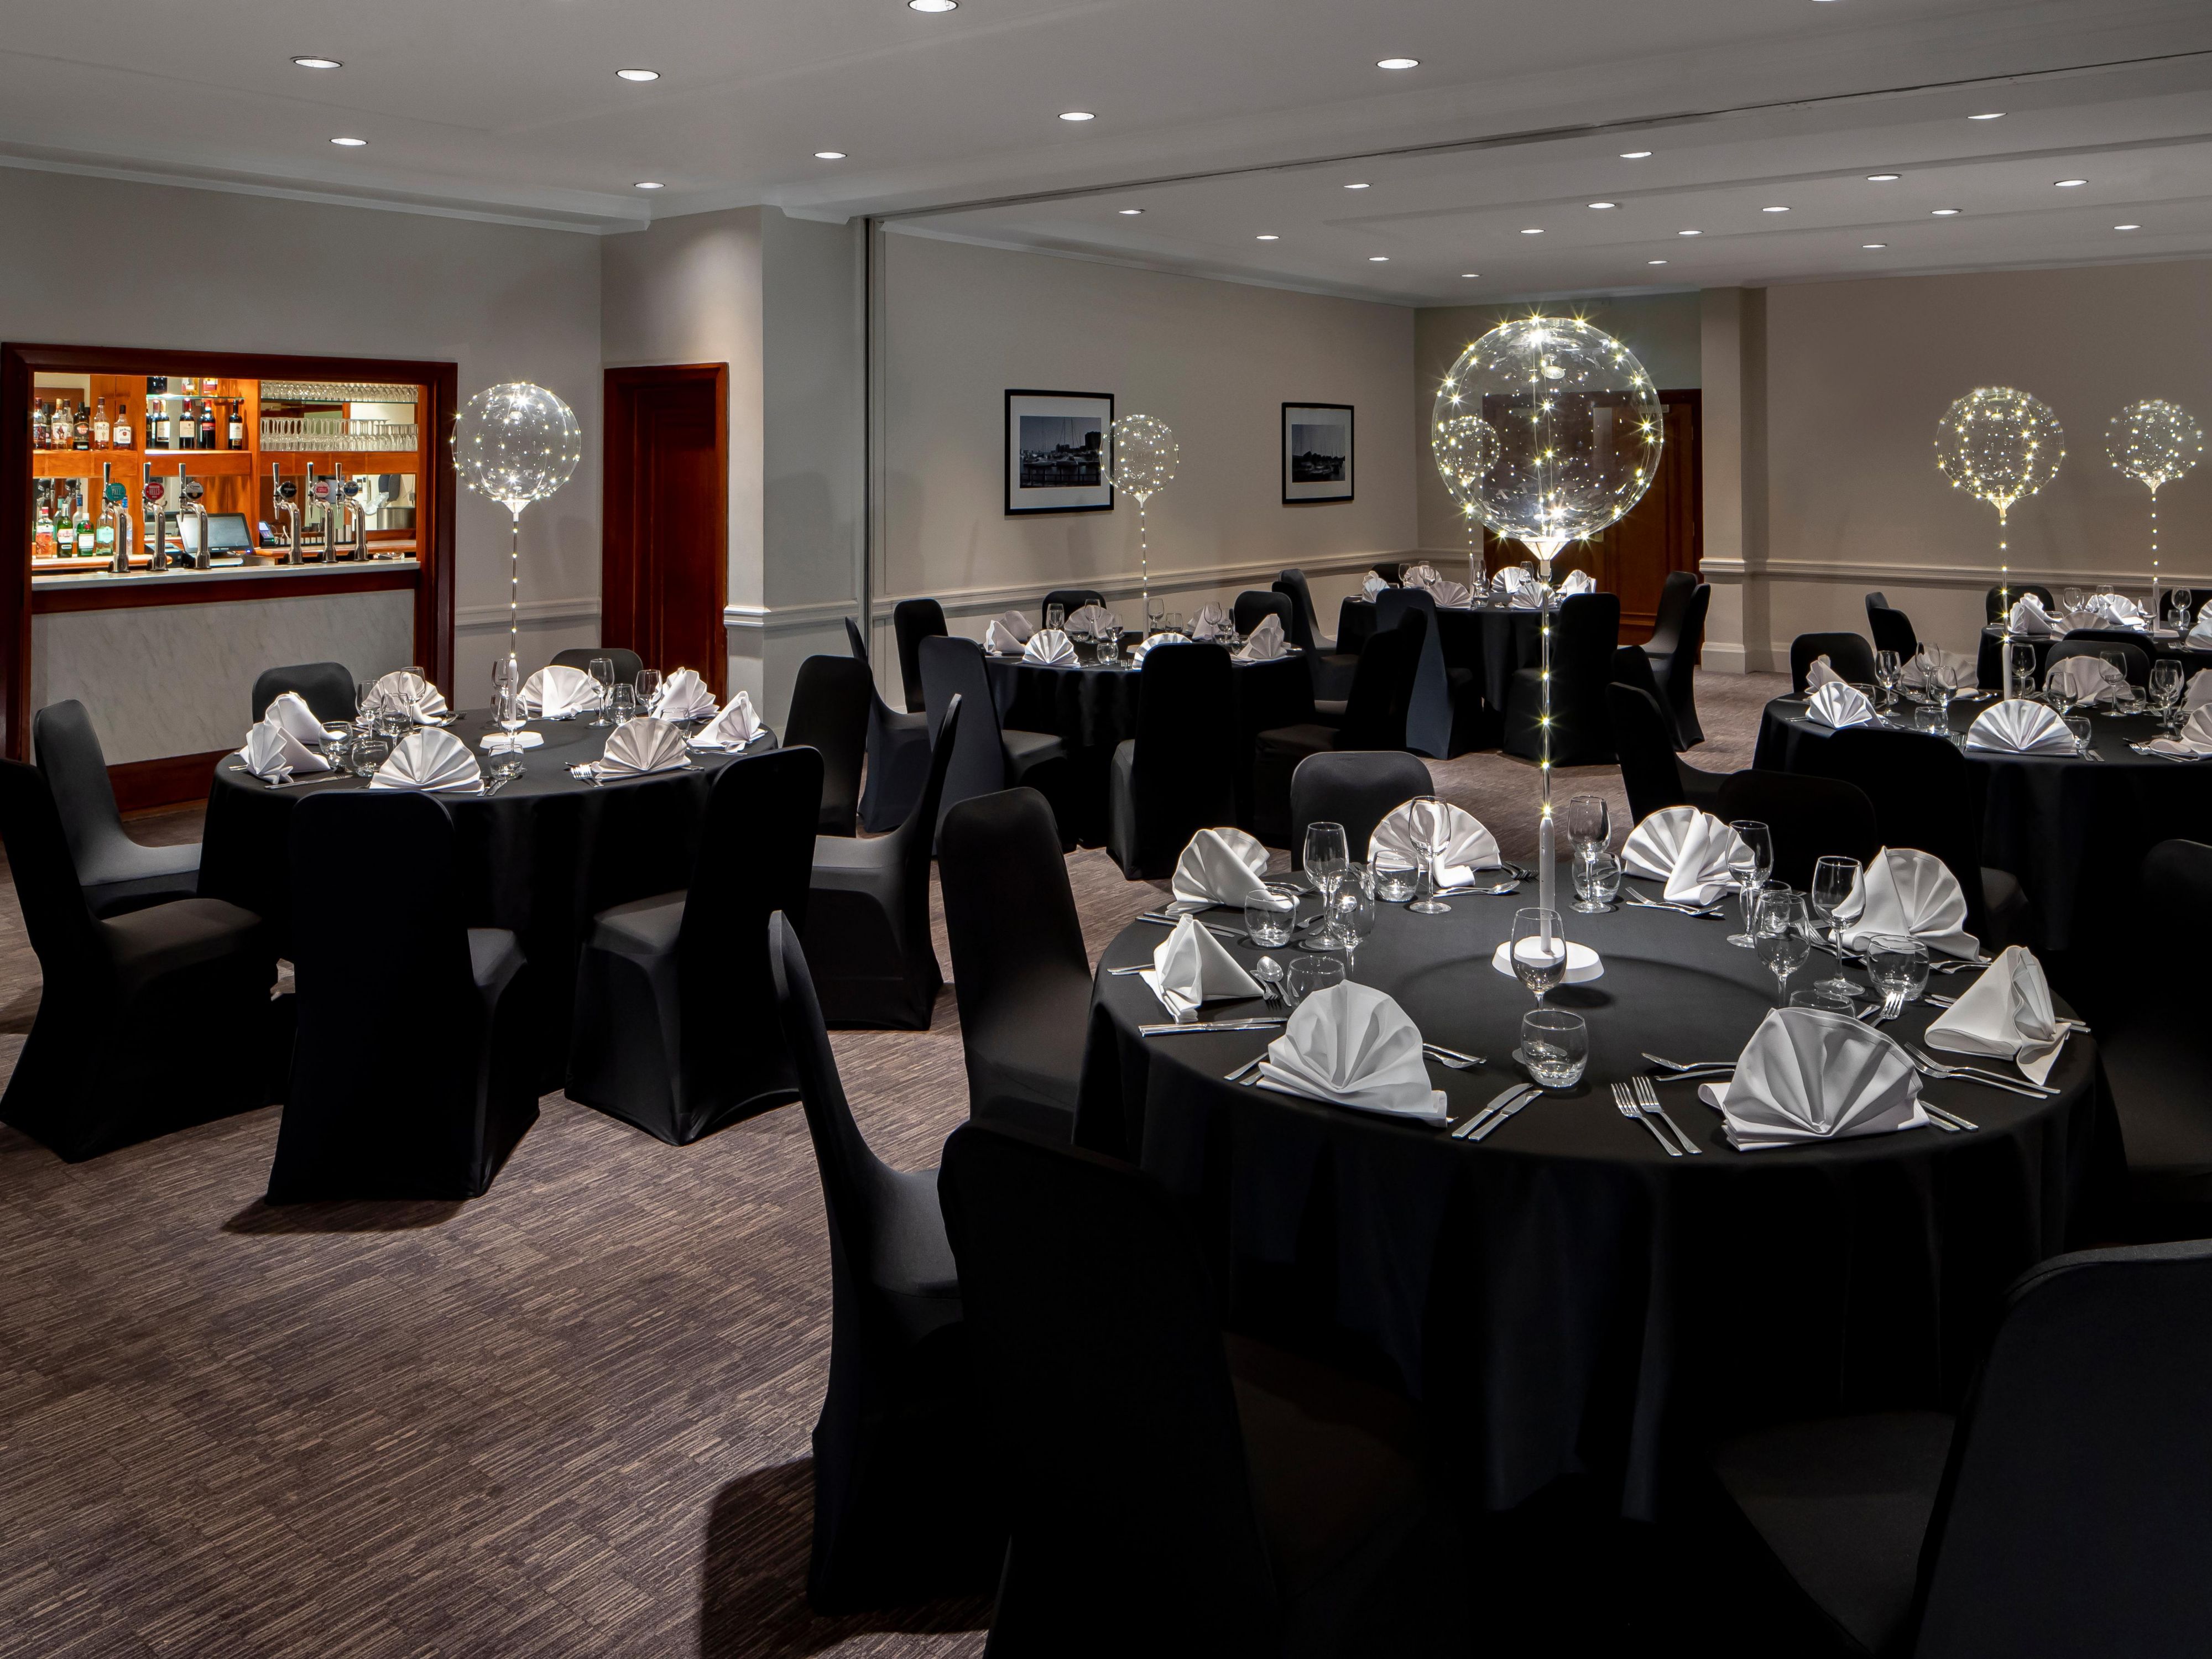 Here at the Holiday Inn Hull Marina, we offer private dining for up to 80 guests. Contact our expert event planners for more information on how we can host your perfect event. 